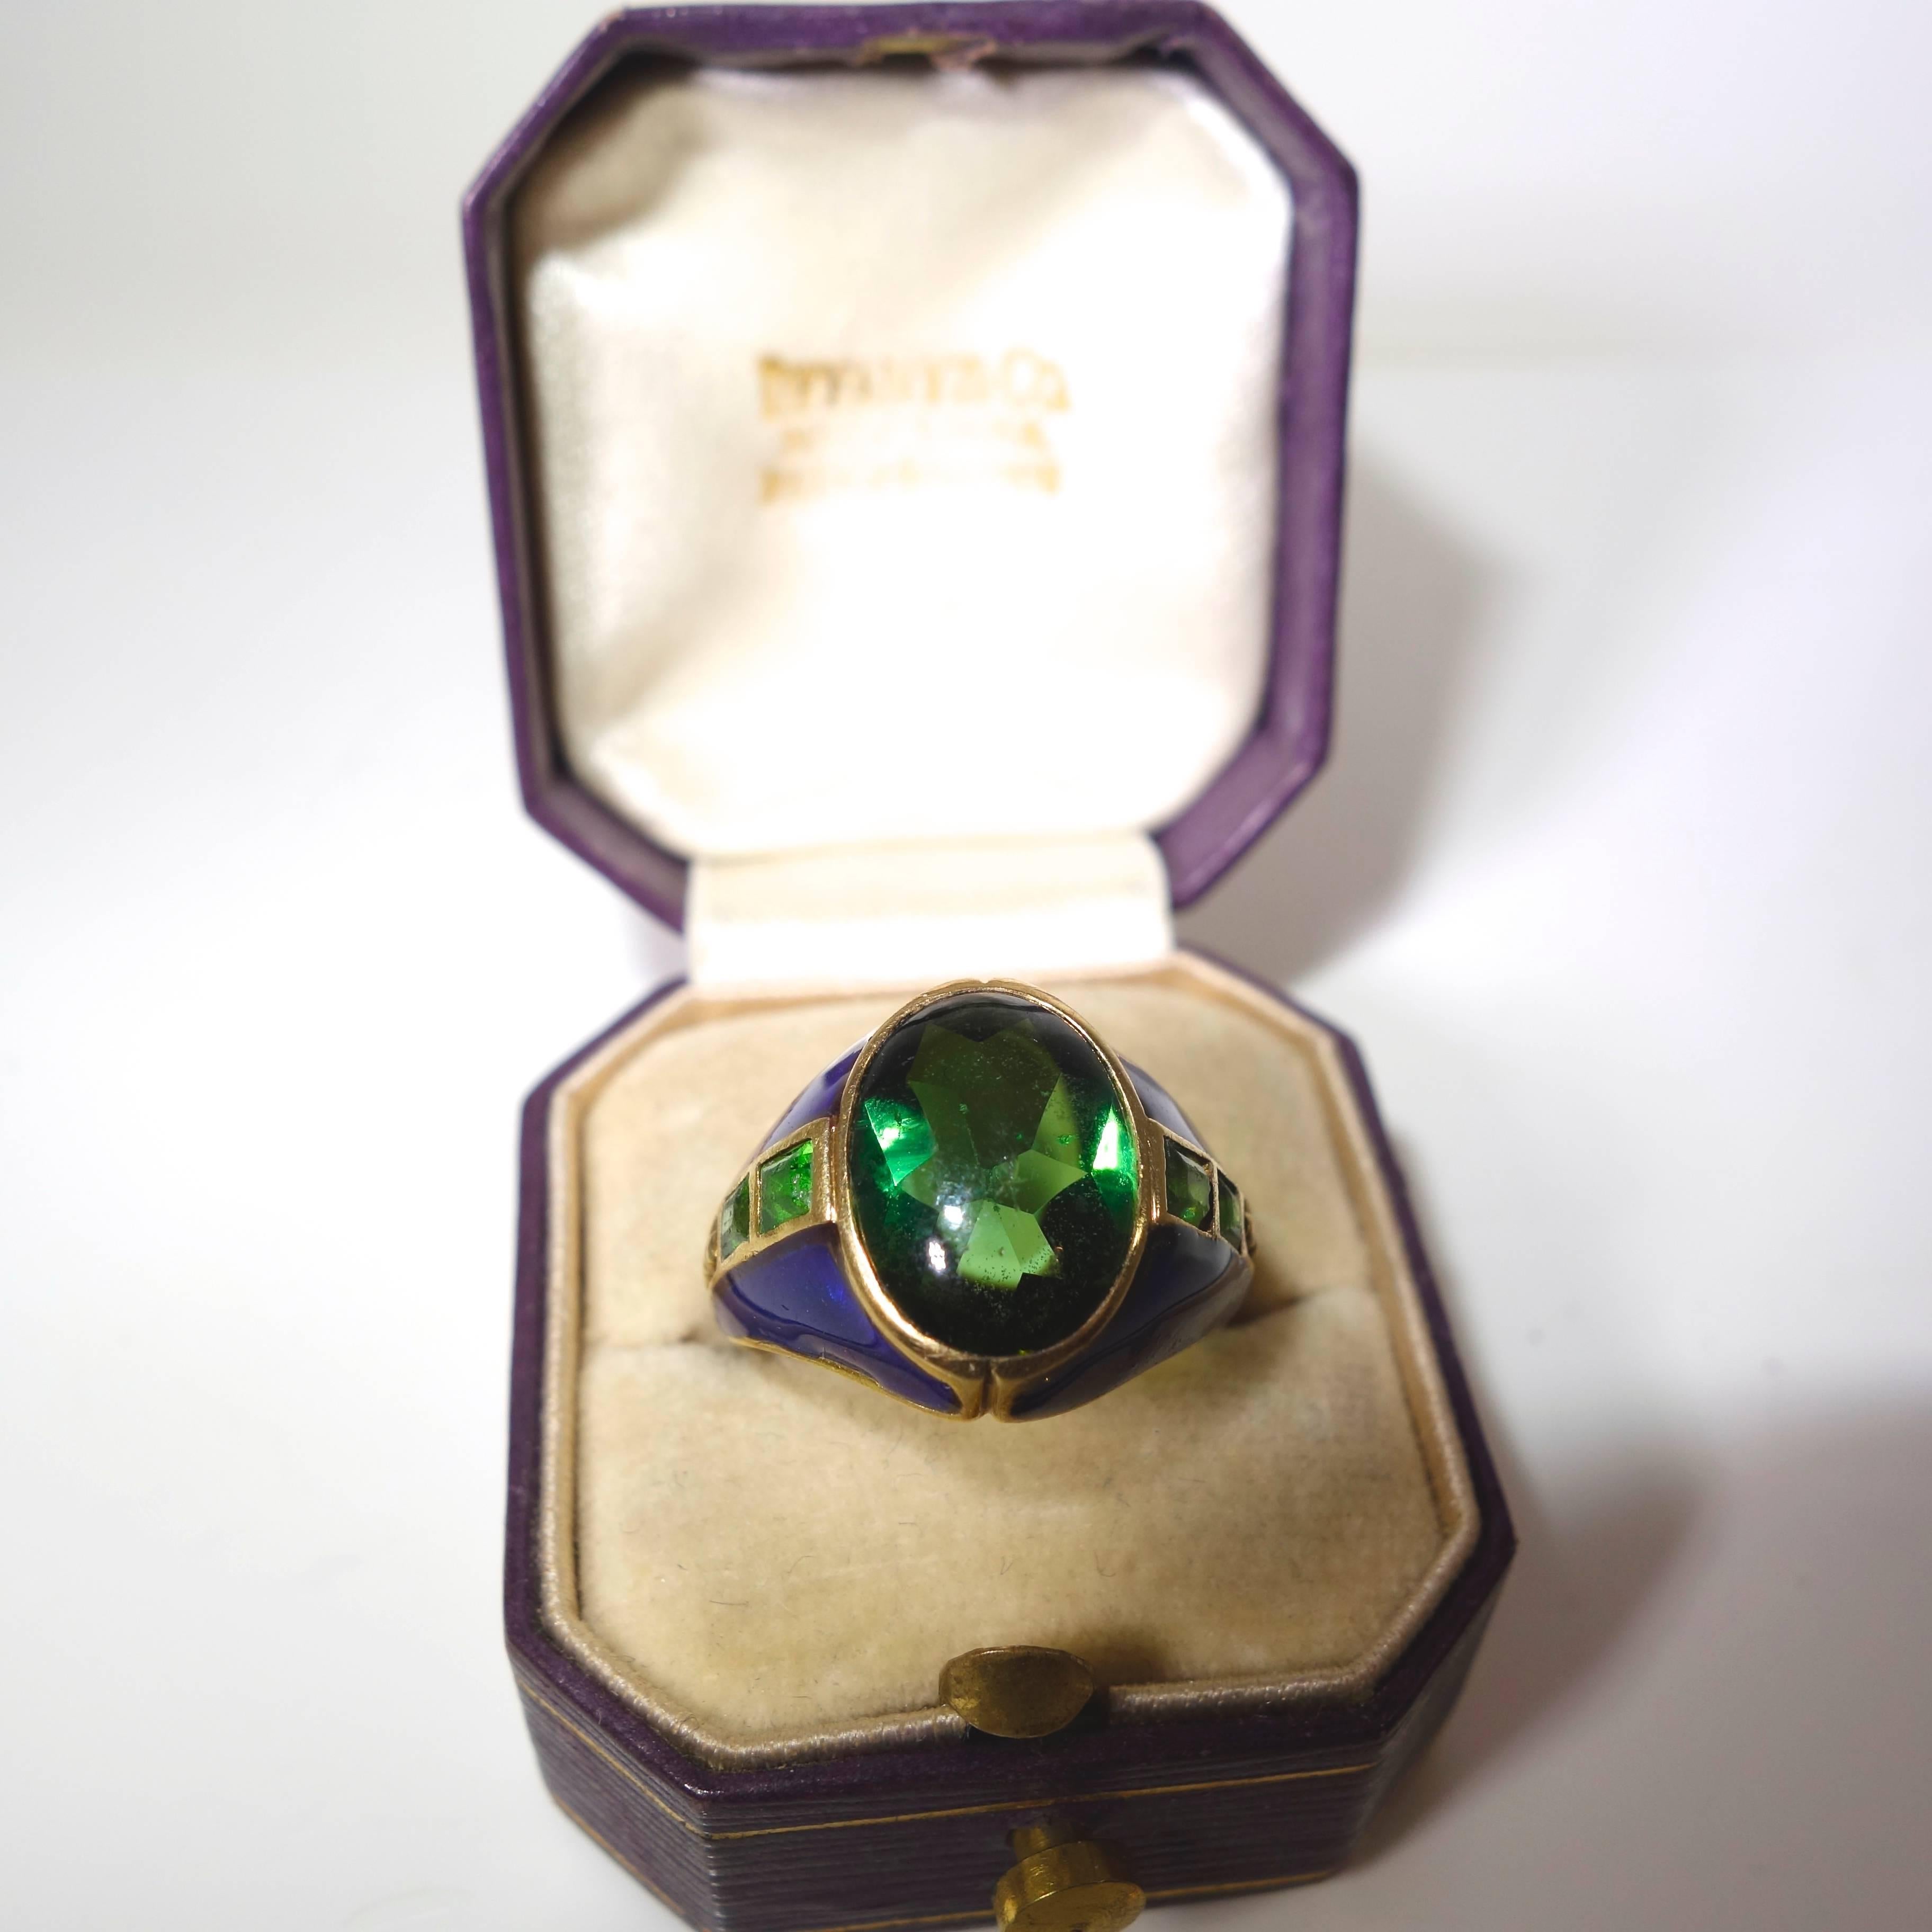 Unusual Arts and Craft ring by Louis Comfort Tiffany, c. 1909. at 1stDibs